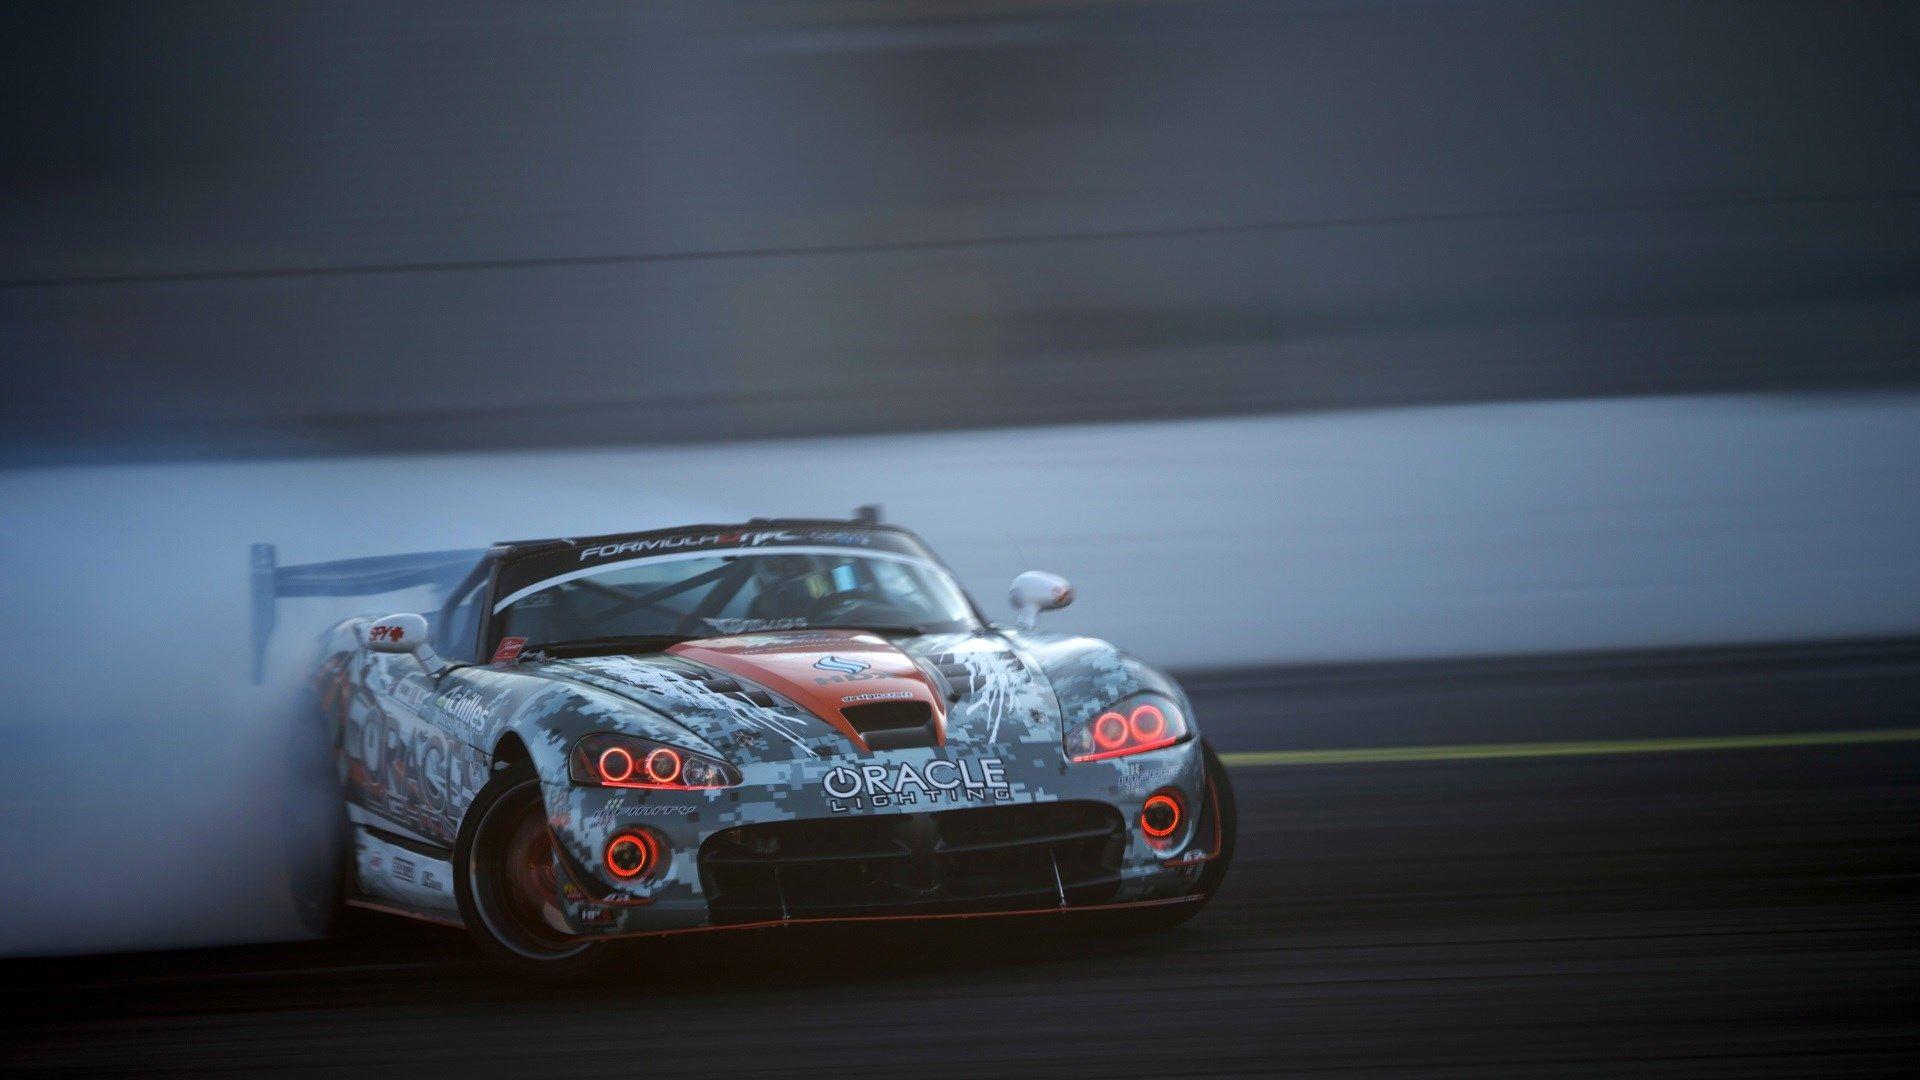 Awesome Dodge Viper Wallpaper 23697 1920x1080 px HDWallSource